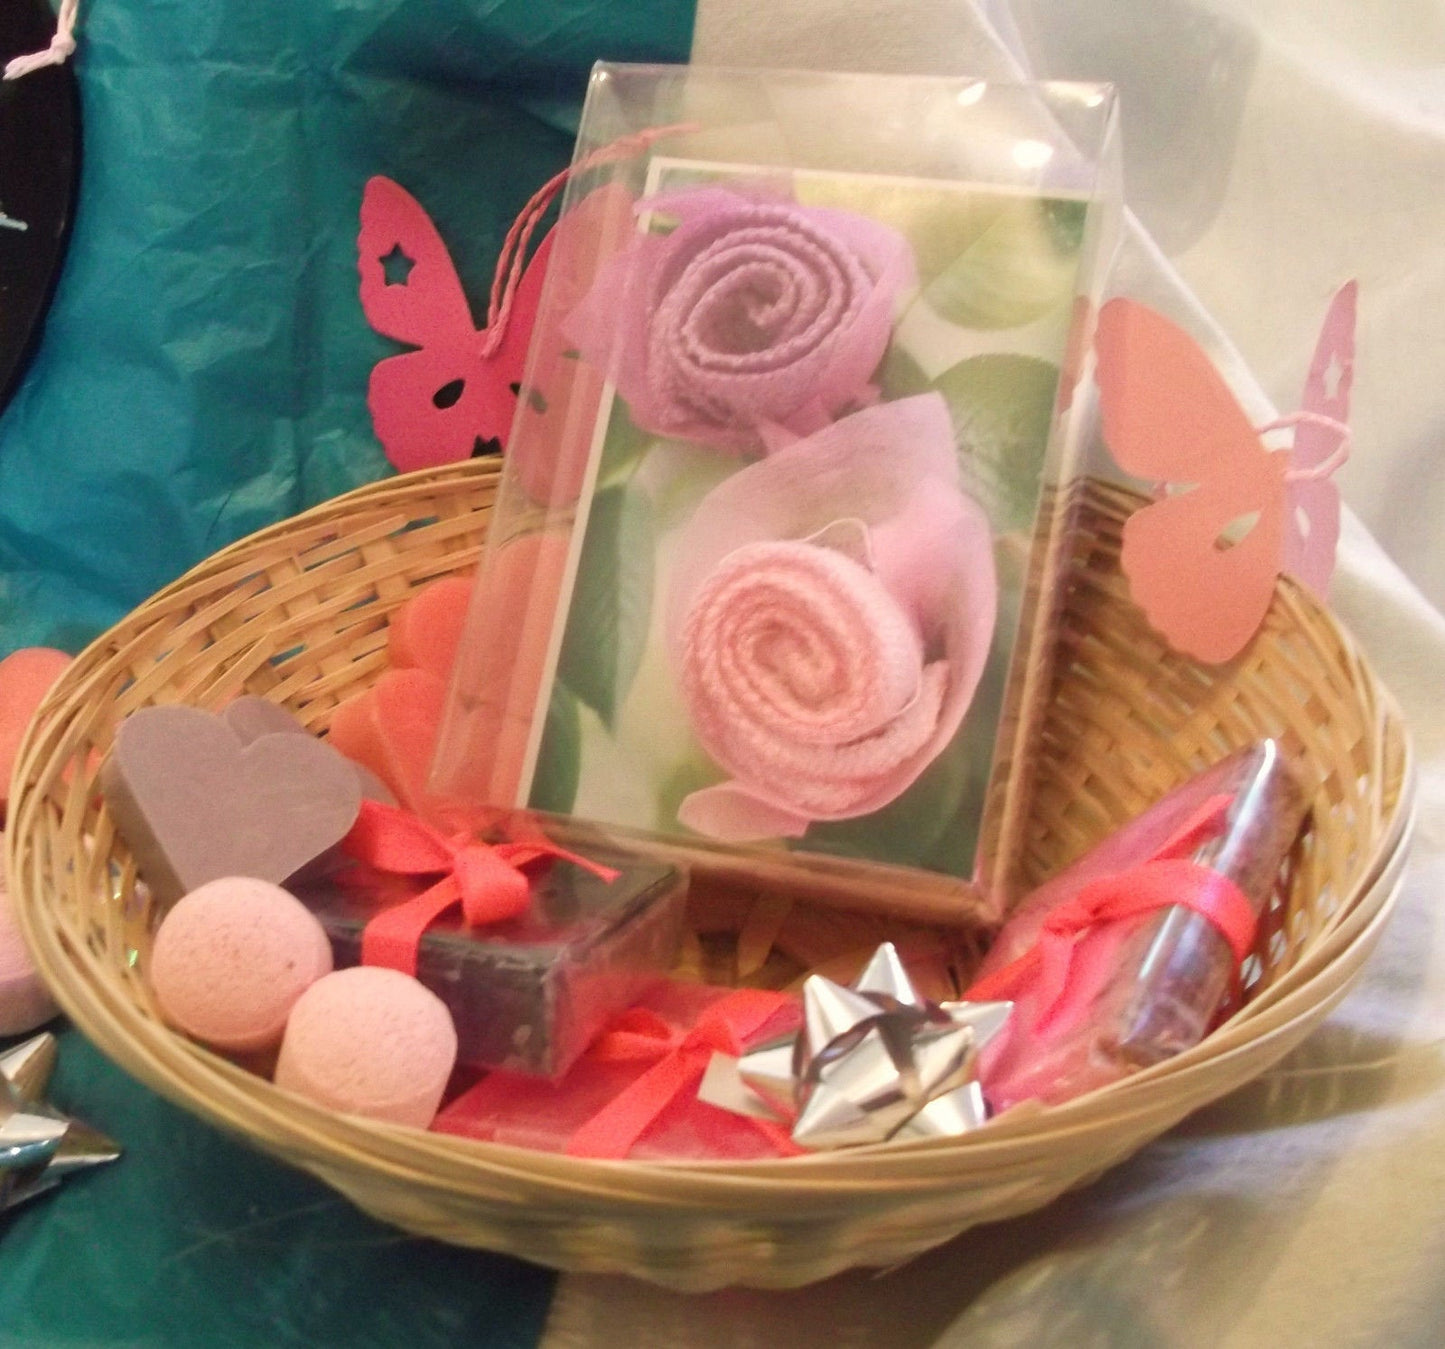 valentines day/mothers day hand-made-soaps in -pink purple basket 6 GIFT SETS.perfect Wonkey Donkey Bazaar